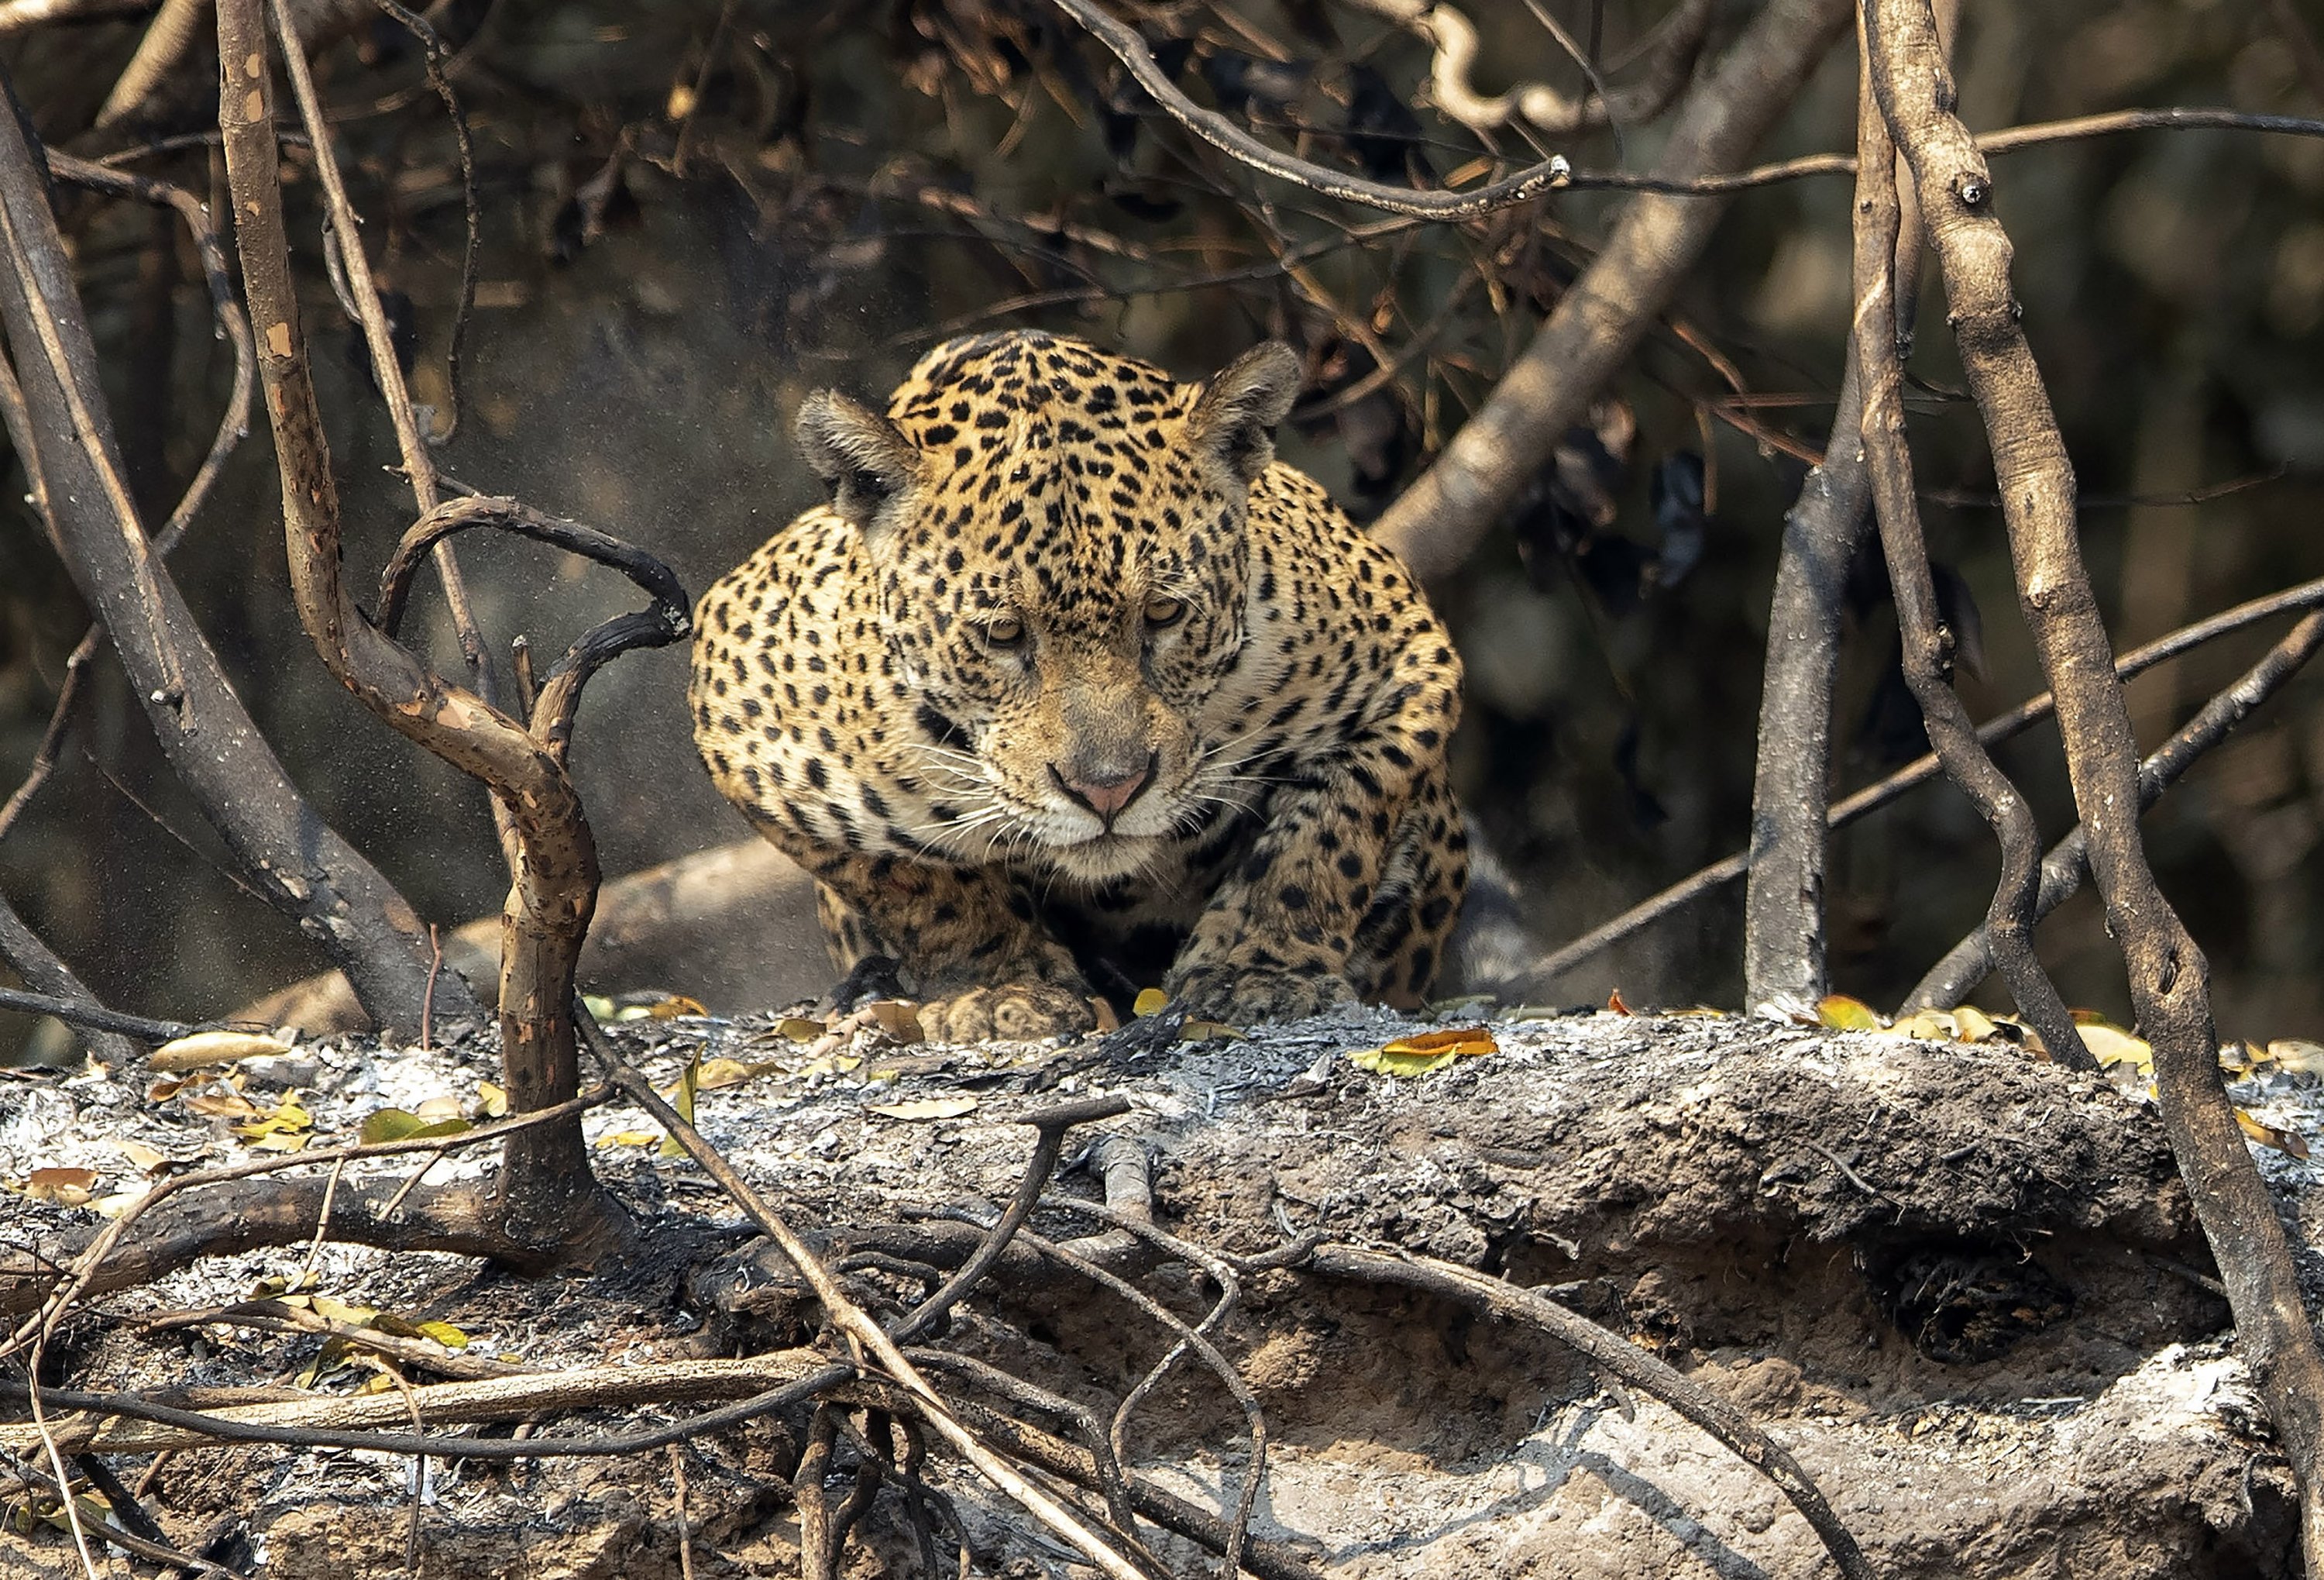 A jaguar crouches in an area recently scorched by wildfires at the Encontro das Aguas state park in the Pantanal wetlands near Pocone, Mato Grosso state, Brazil, Sunday, Sept. 13, 2020. The Pantanal is the world’s largest tropical wetlands, popular for viewing the furtive felines, along with caiman, capybara and more. This year the Pantanal is exceptionally dry and burning at a record rate.  (AP Photo/Andre Penner)